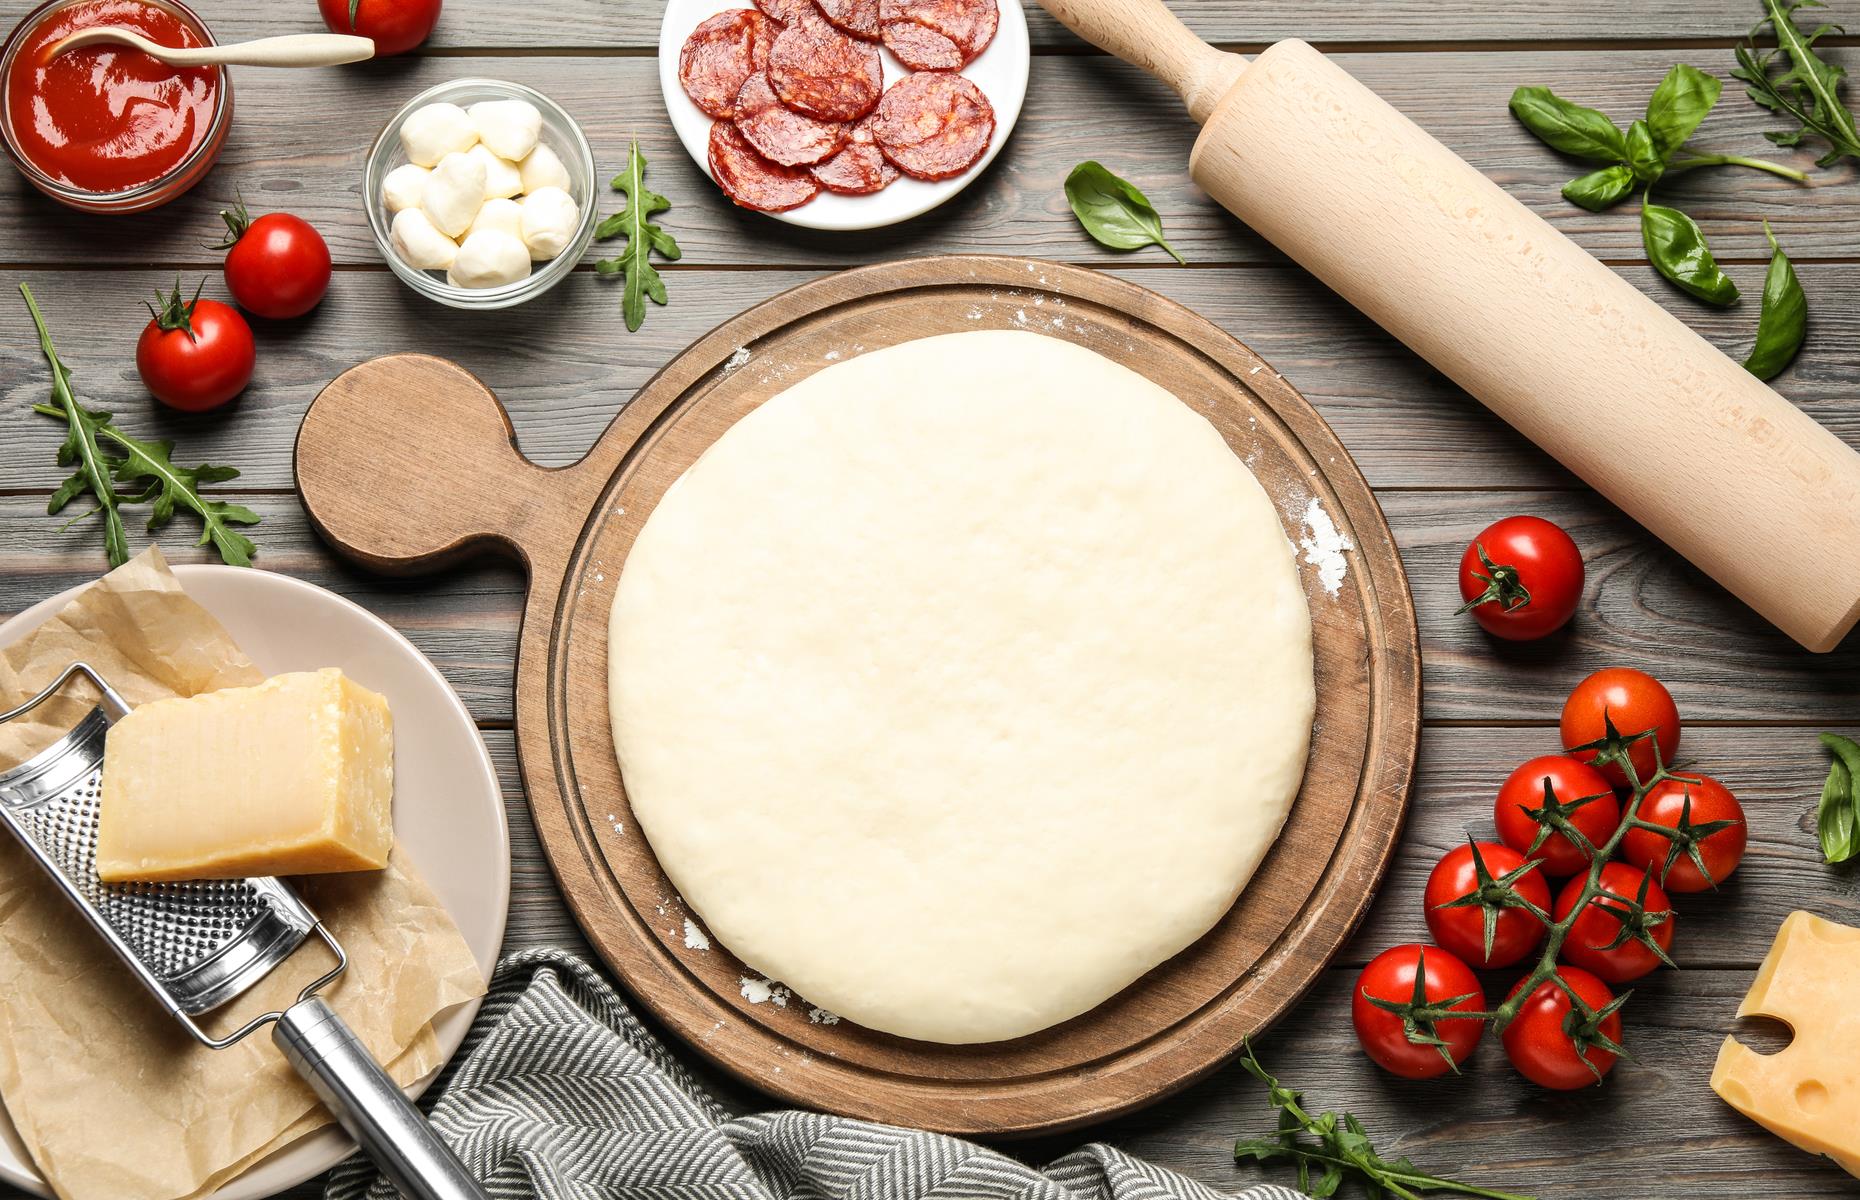 The question is – how do you get the assembled pizza on to a hot baking stone or metal pizza dish? Use a pizza paddle or a rimless baking sheet, well dusted with semolina or flour. Then it simply slides off into the oven without sticking.